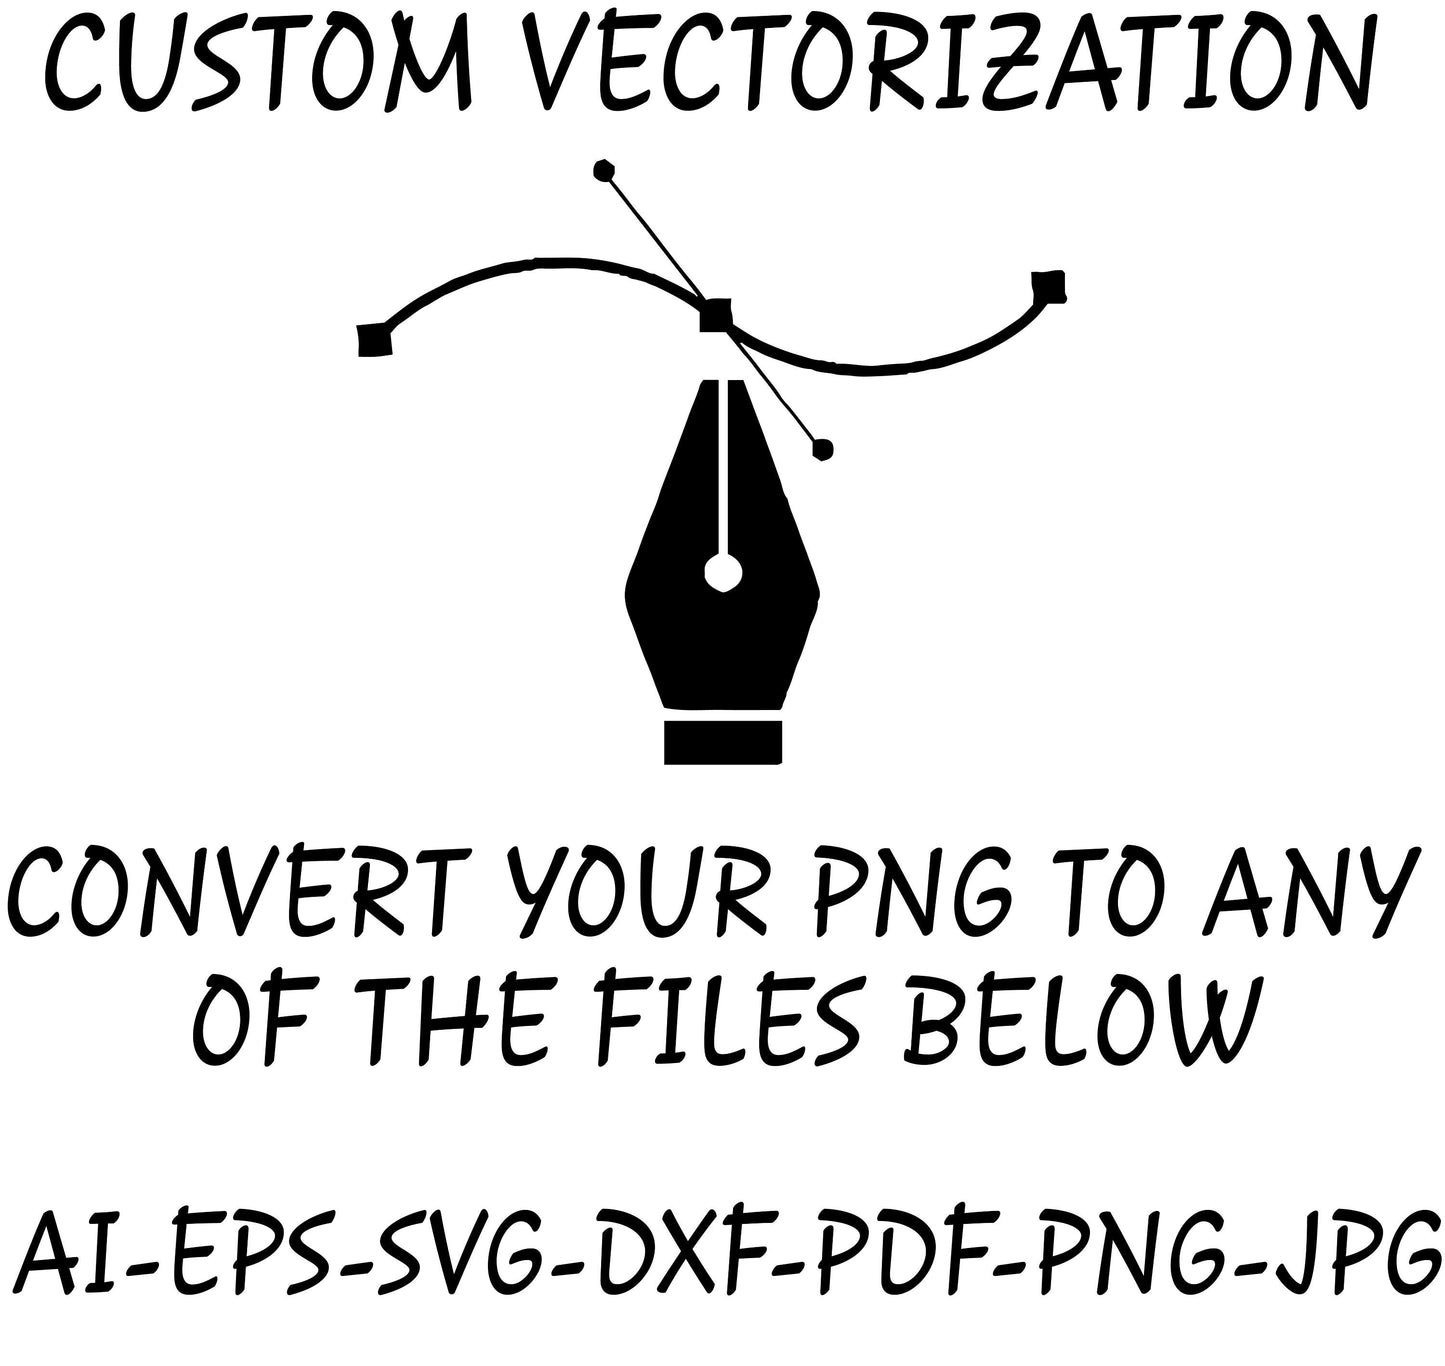 Professional Vector Conversion Service: Convert Pixel/Raster Images to Vector Art Files  - AI,  Svg, Eps, Dxf, Pdf, Png, Jpg